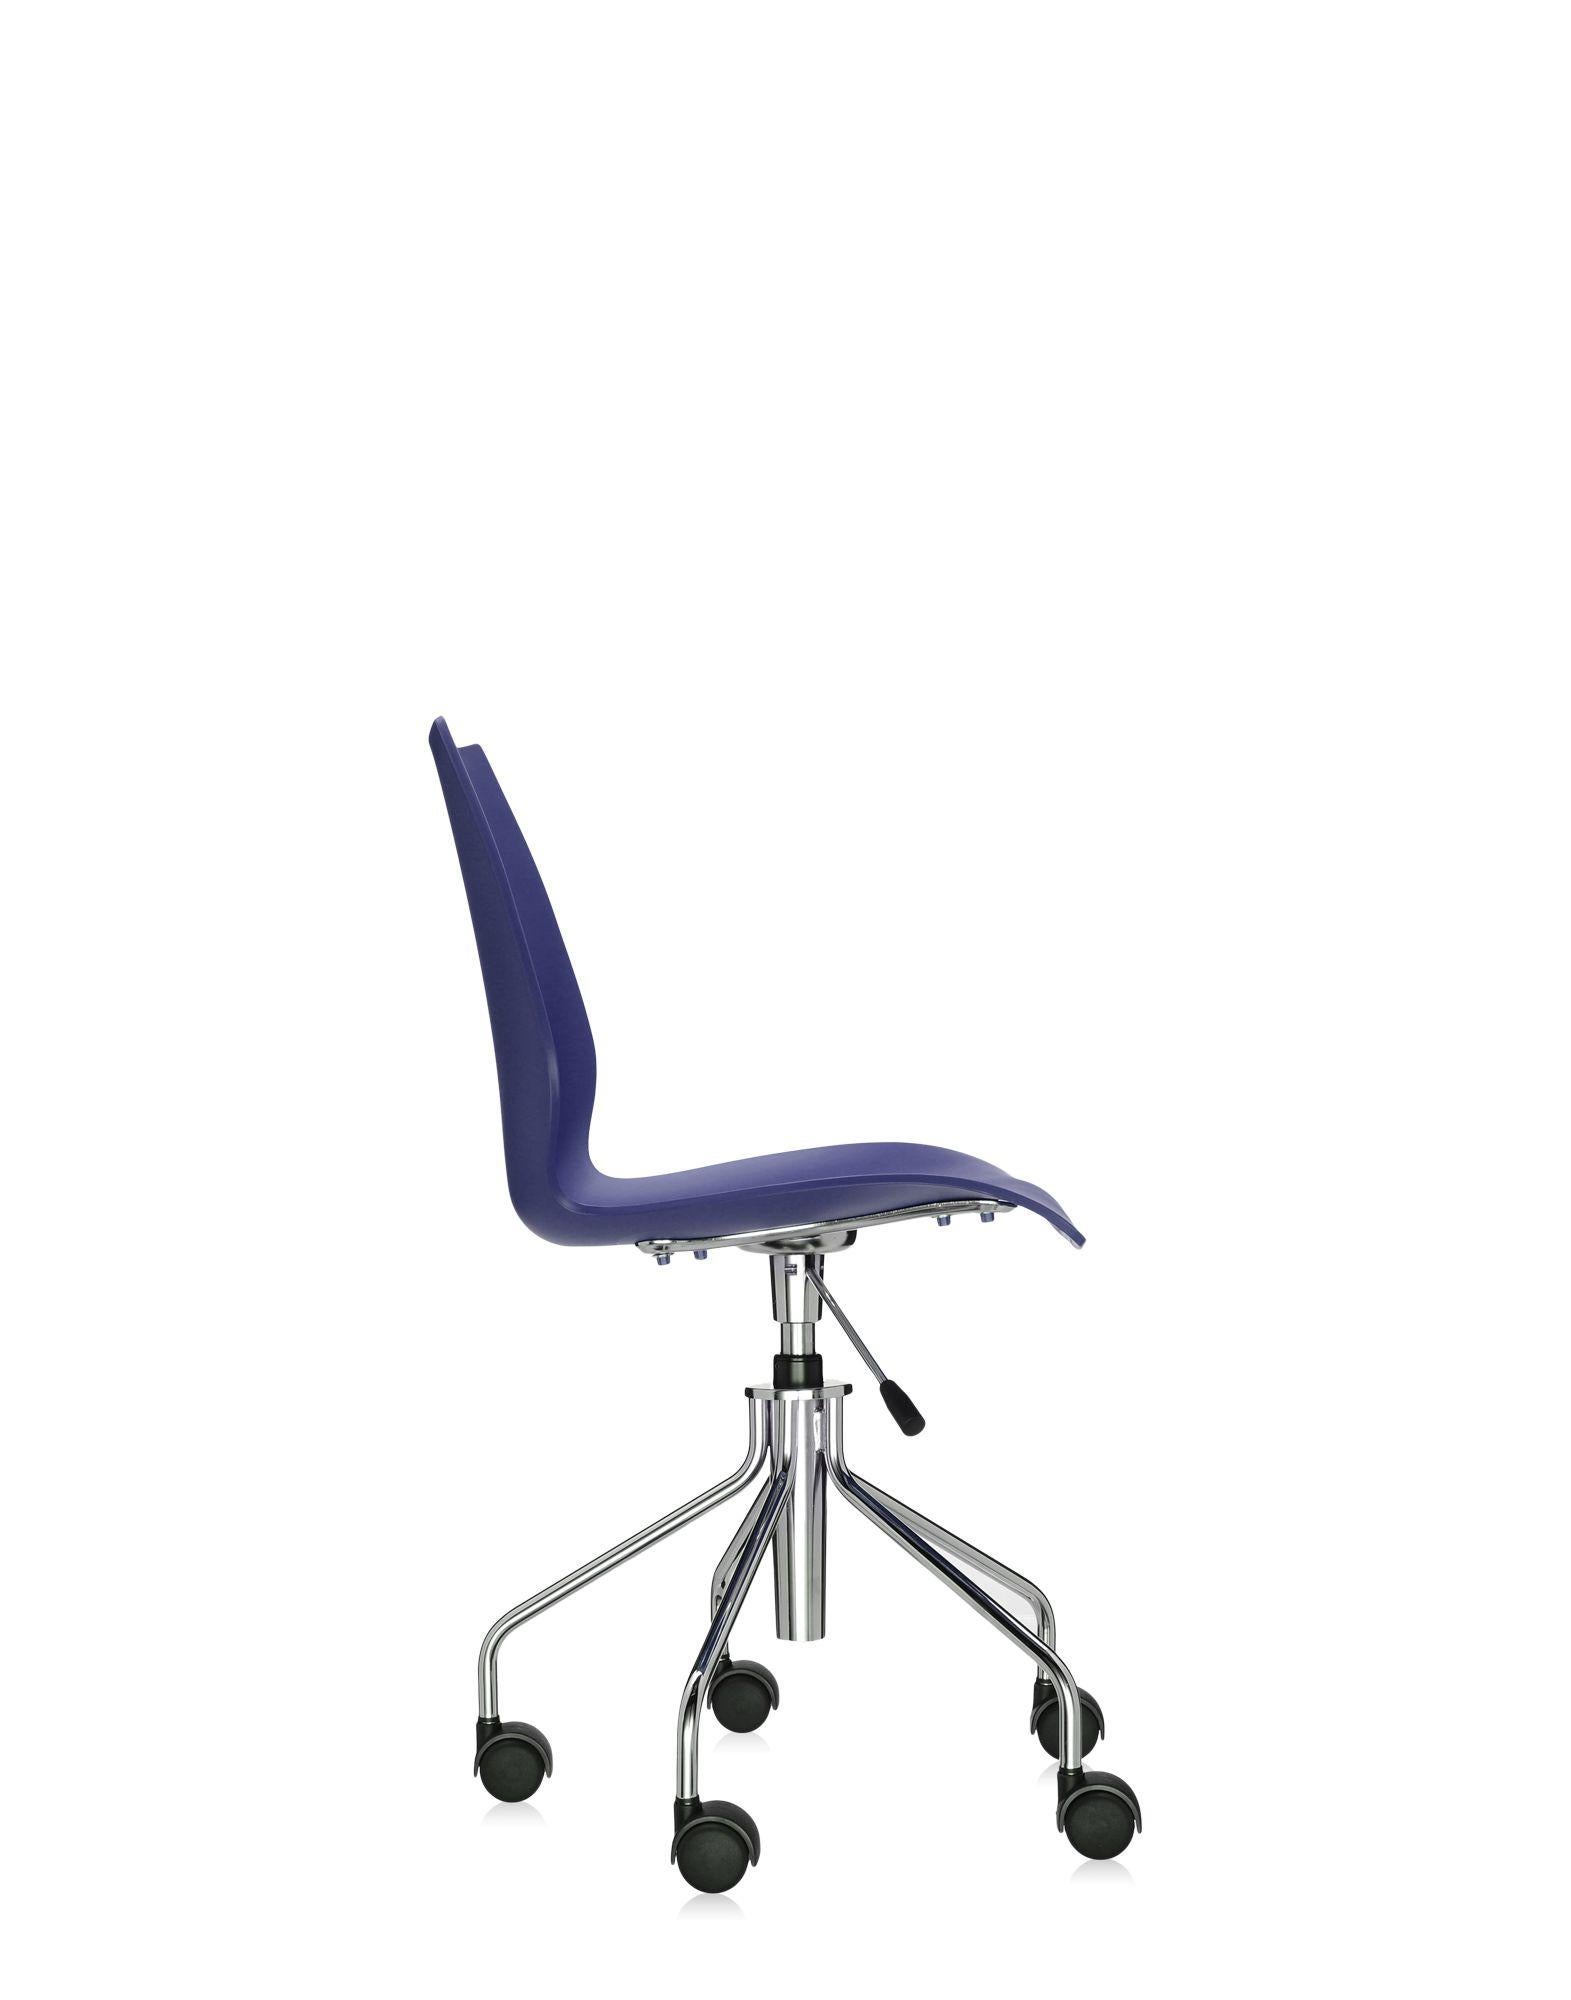 Plastic Kartell Maui Swivel Chair Adjustable in Navy Blue by Vico Magistretti